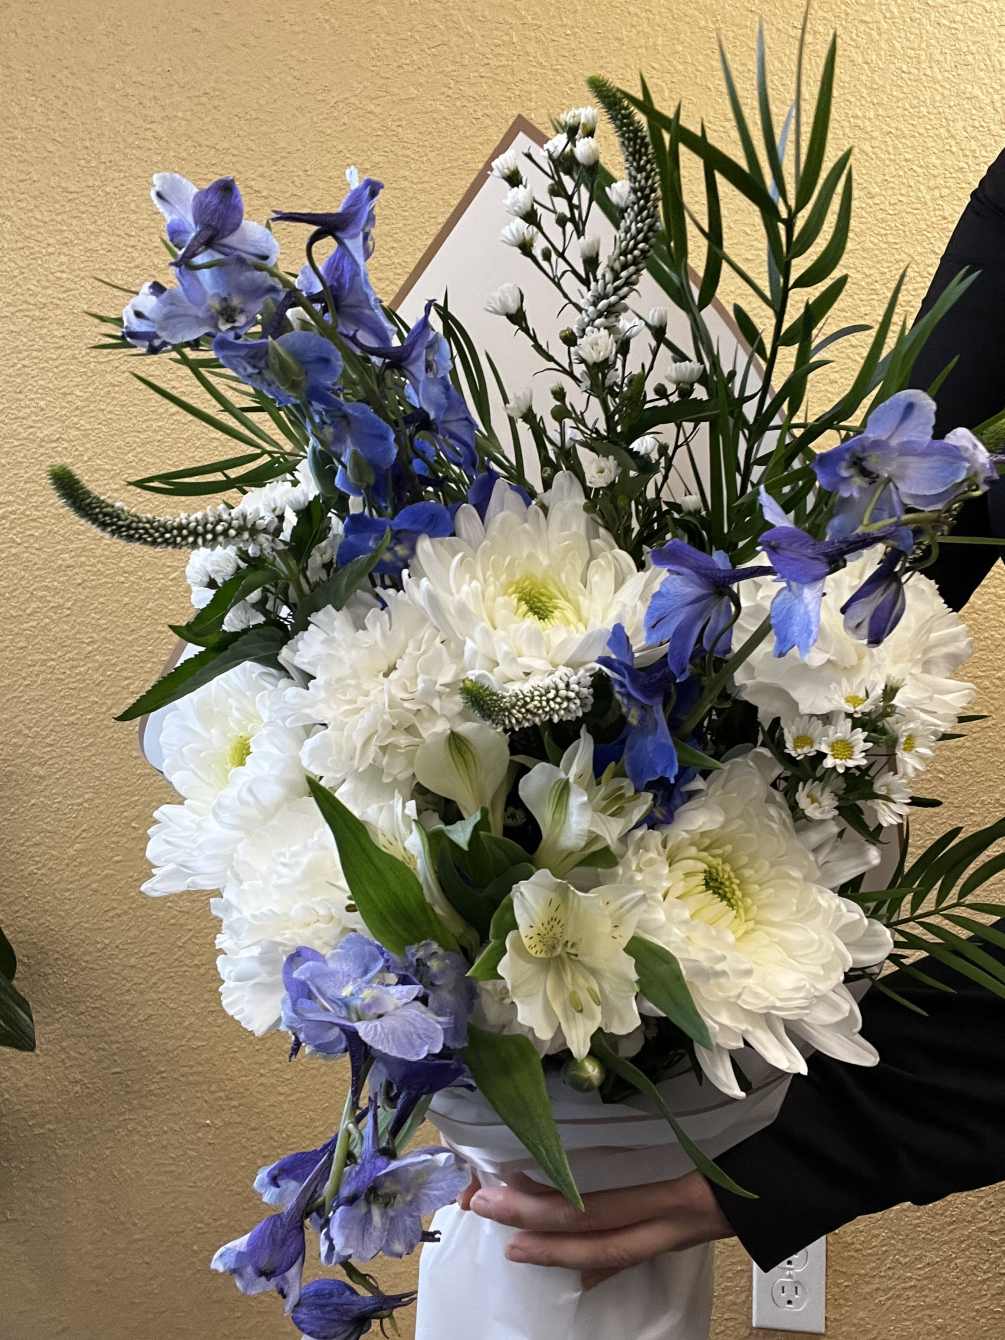 Blue and white and everything nice, this wrapped bouquet is perfect for